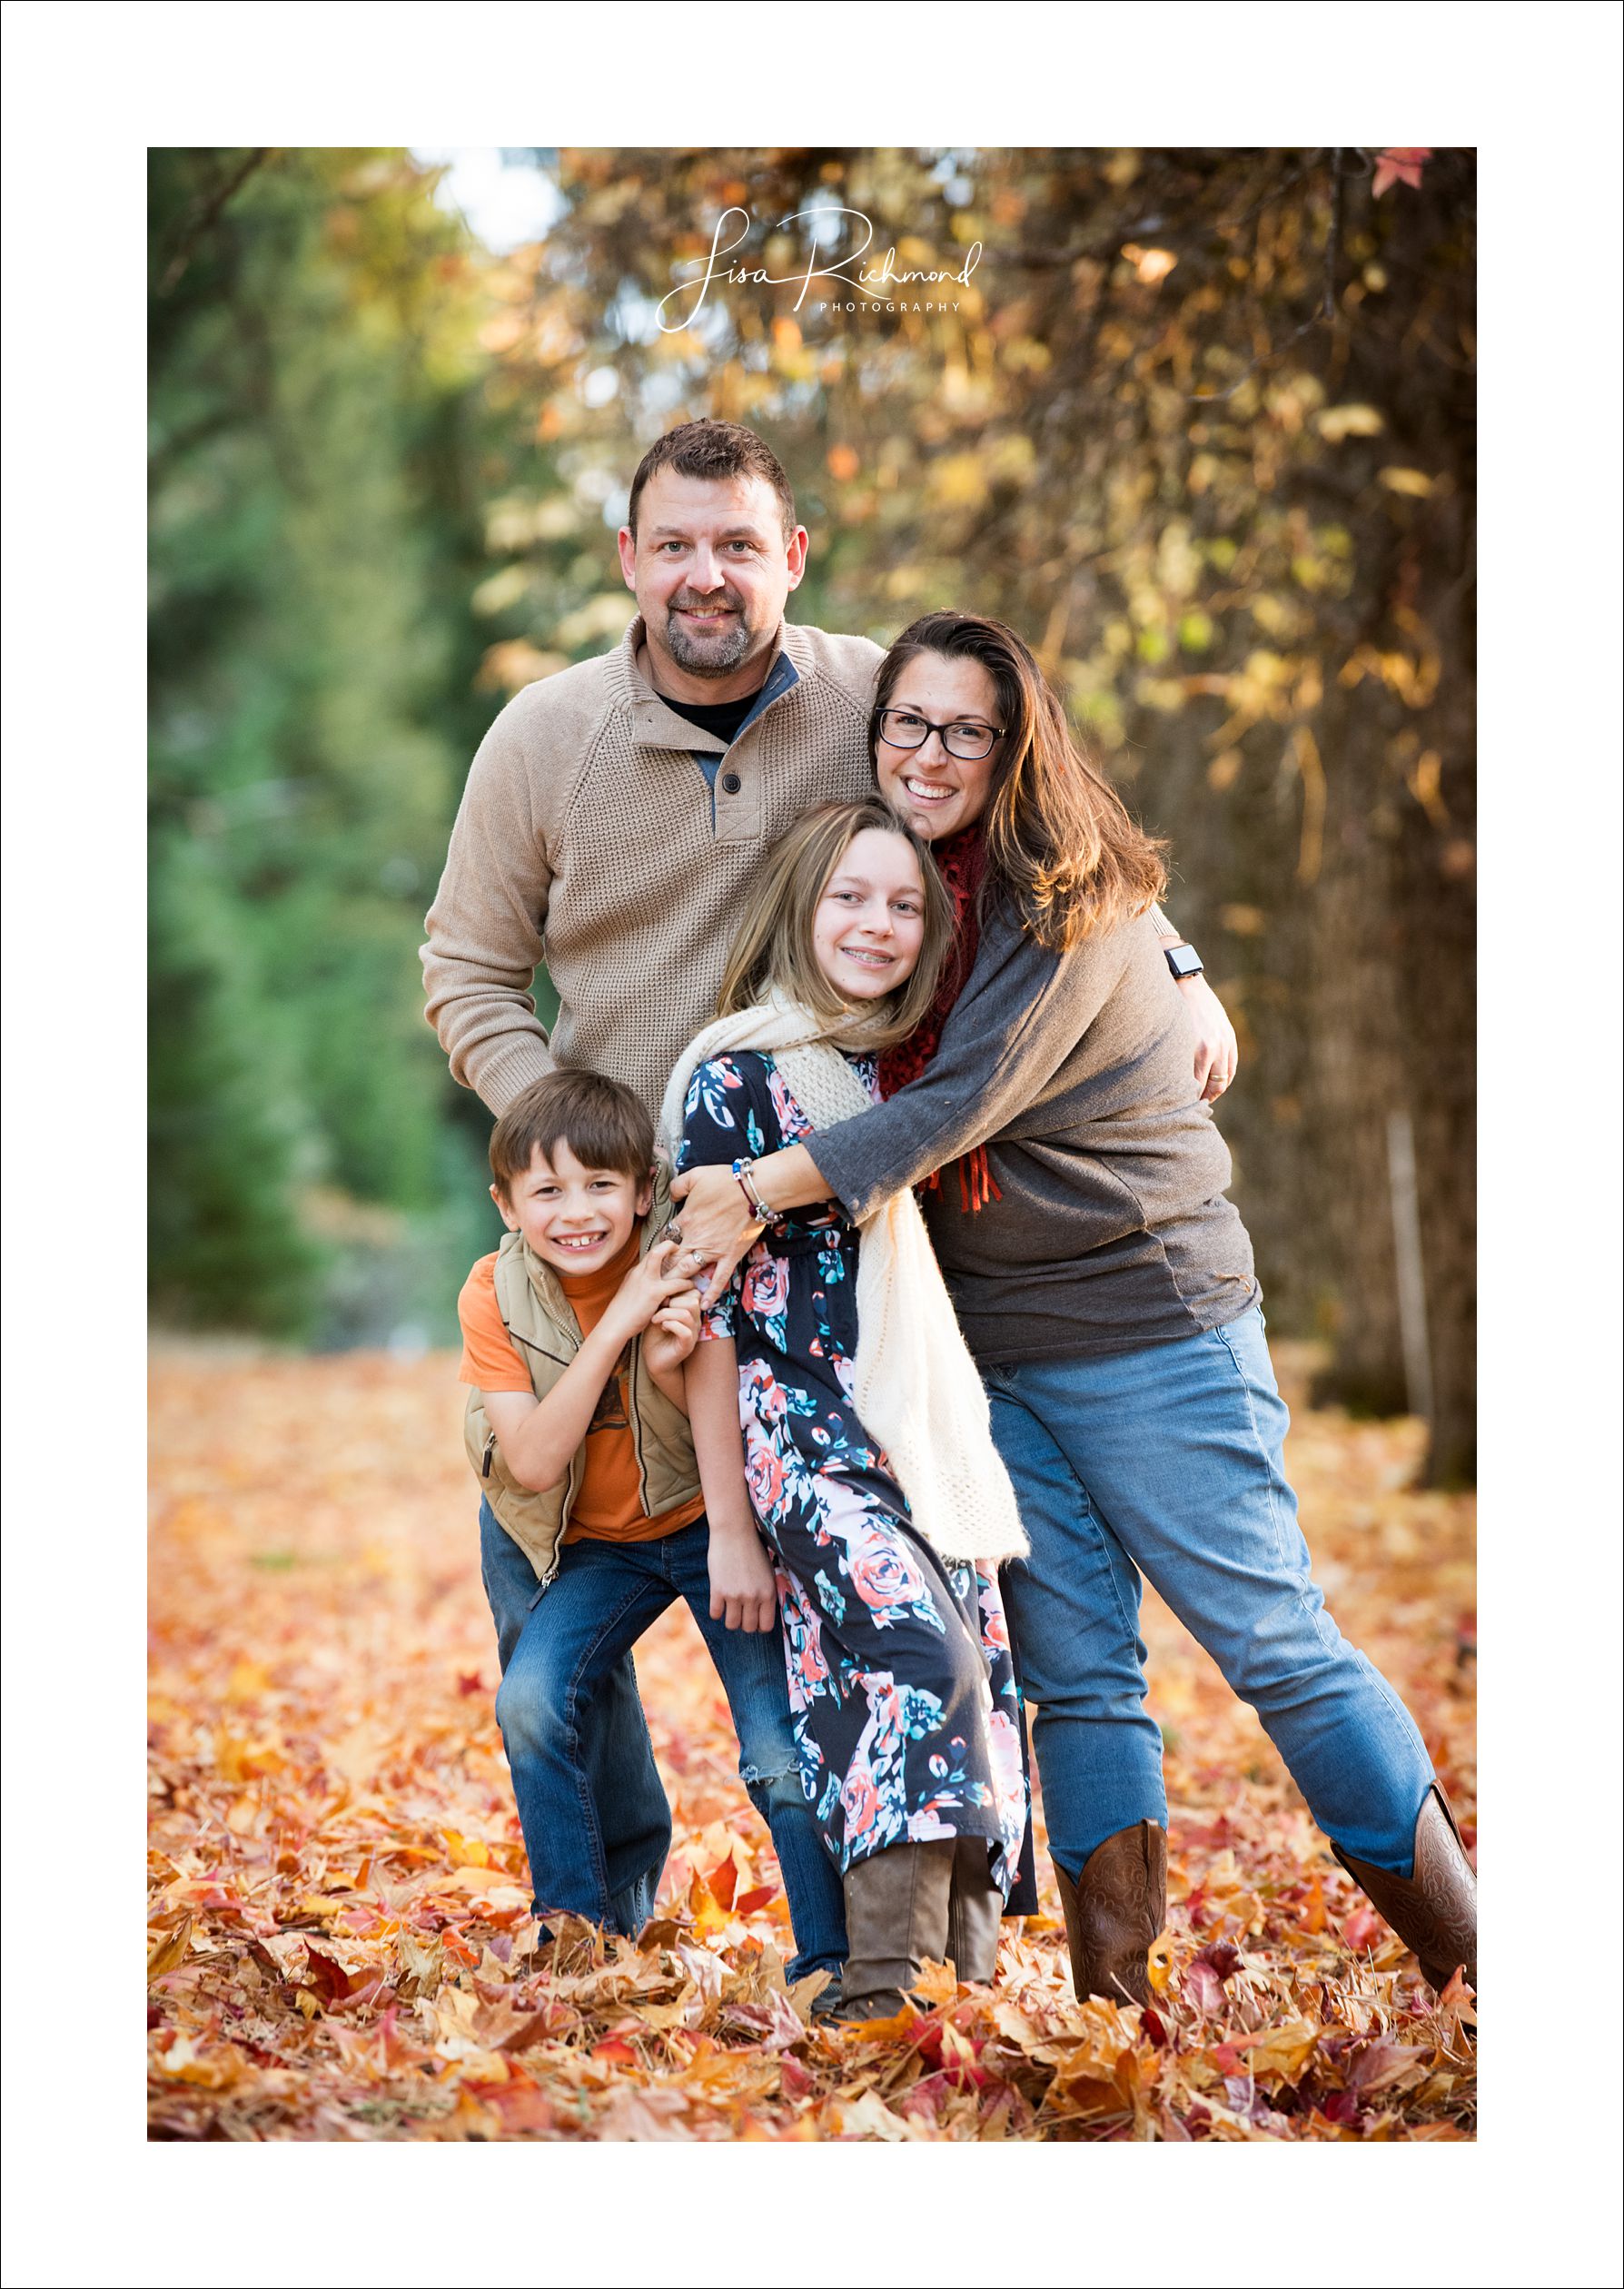 The McDaniel Family 2019- Some families just have it!